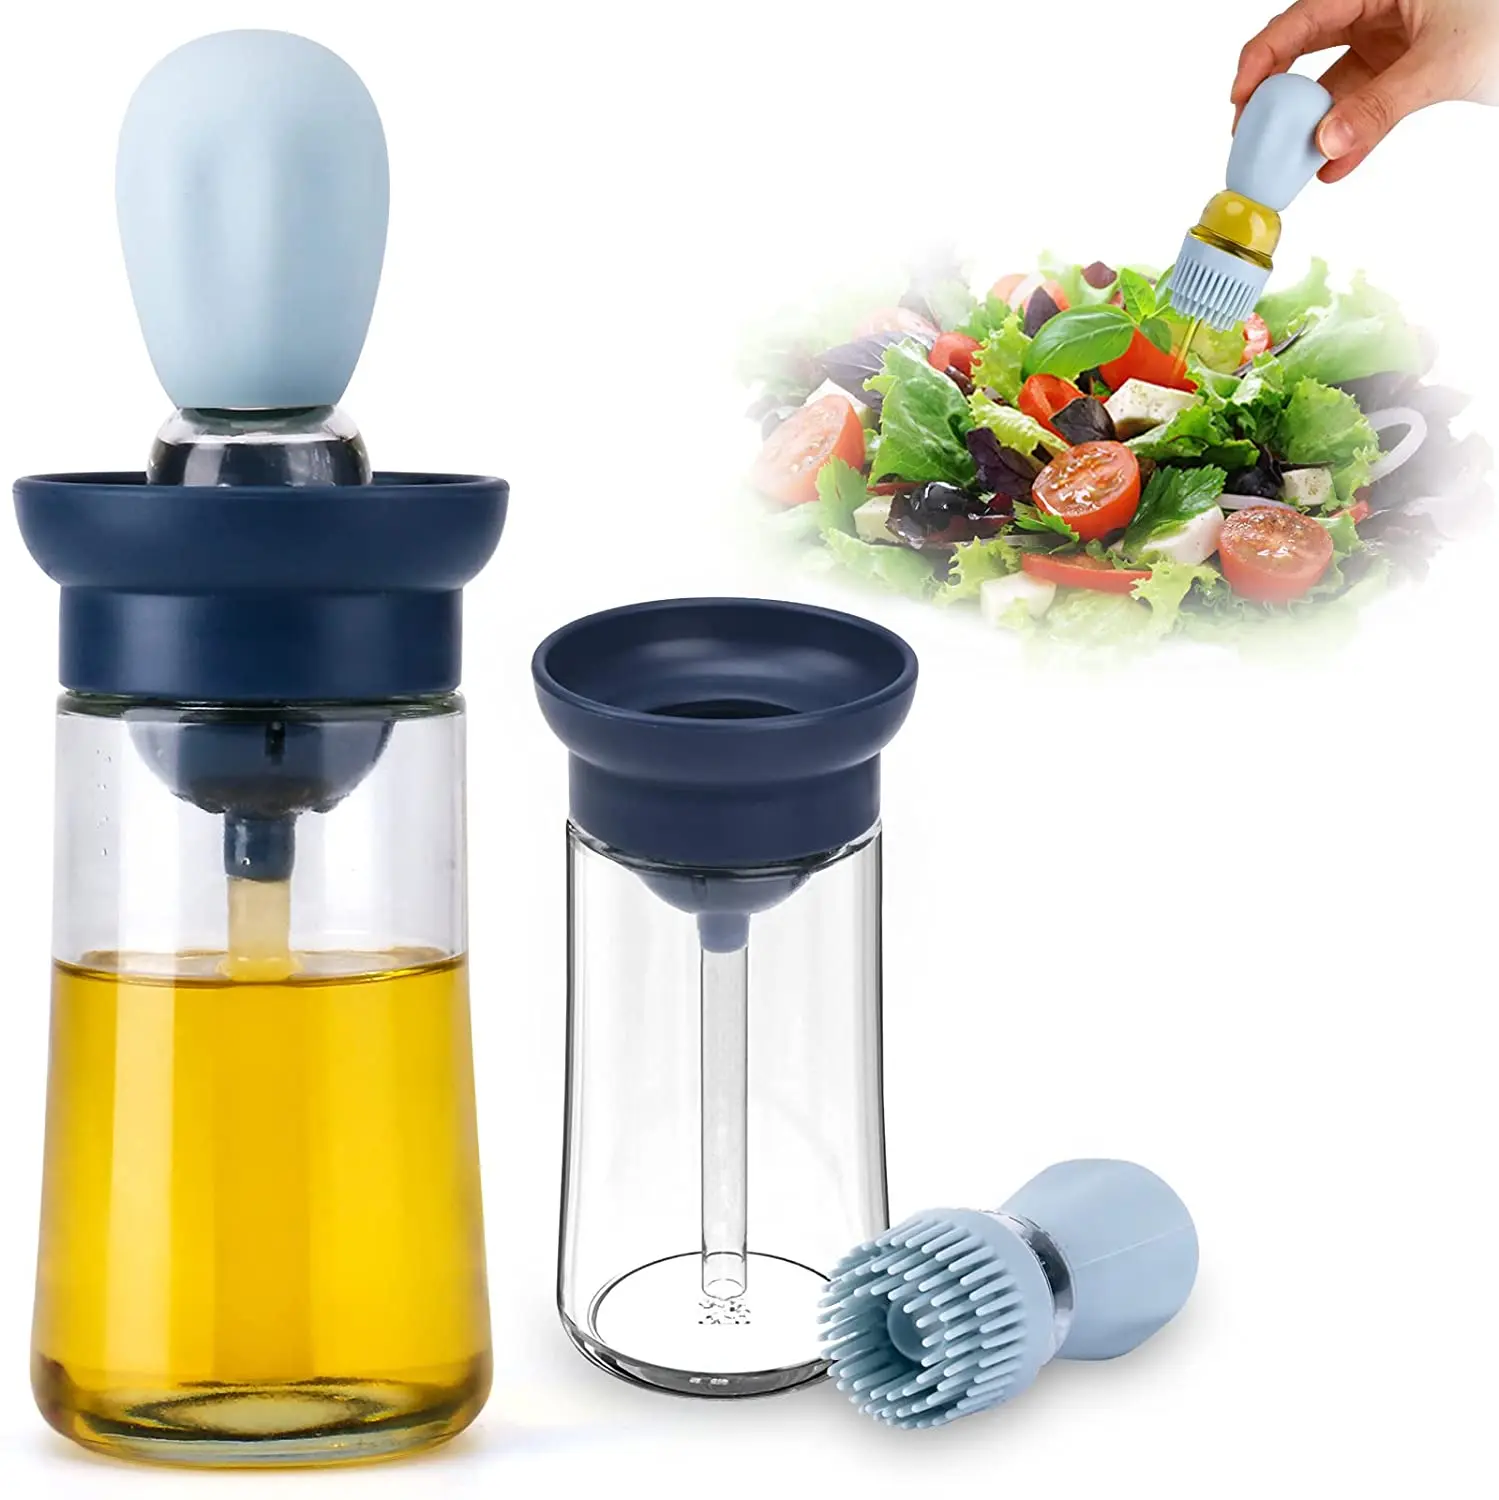 

Glass Olive Oil Dispenser with Brush 2 in 1,Silicone Dropper Measuring Cooking Oil Bottle and Basting Brush for Kitchen Baking, Black, white